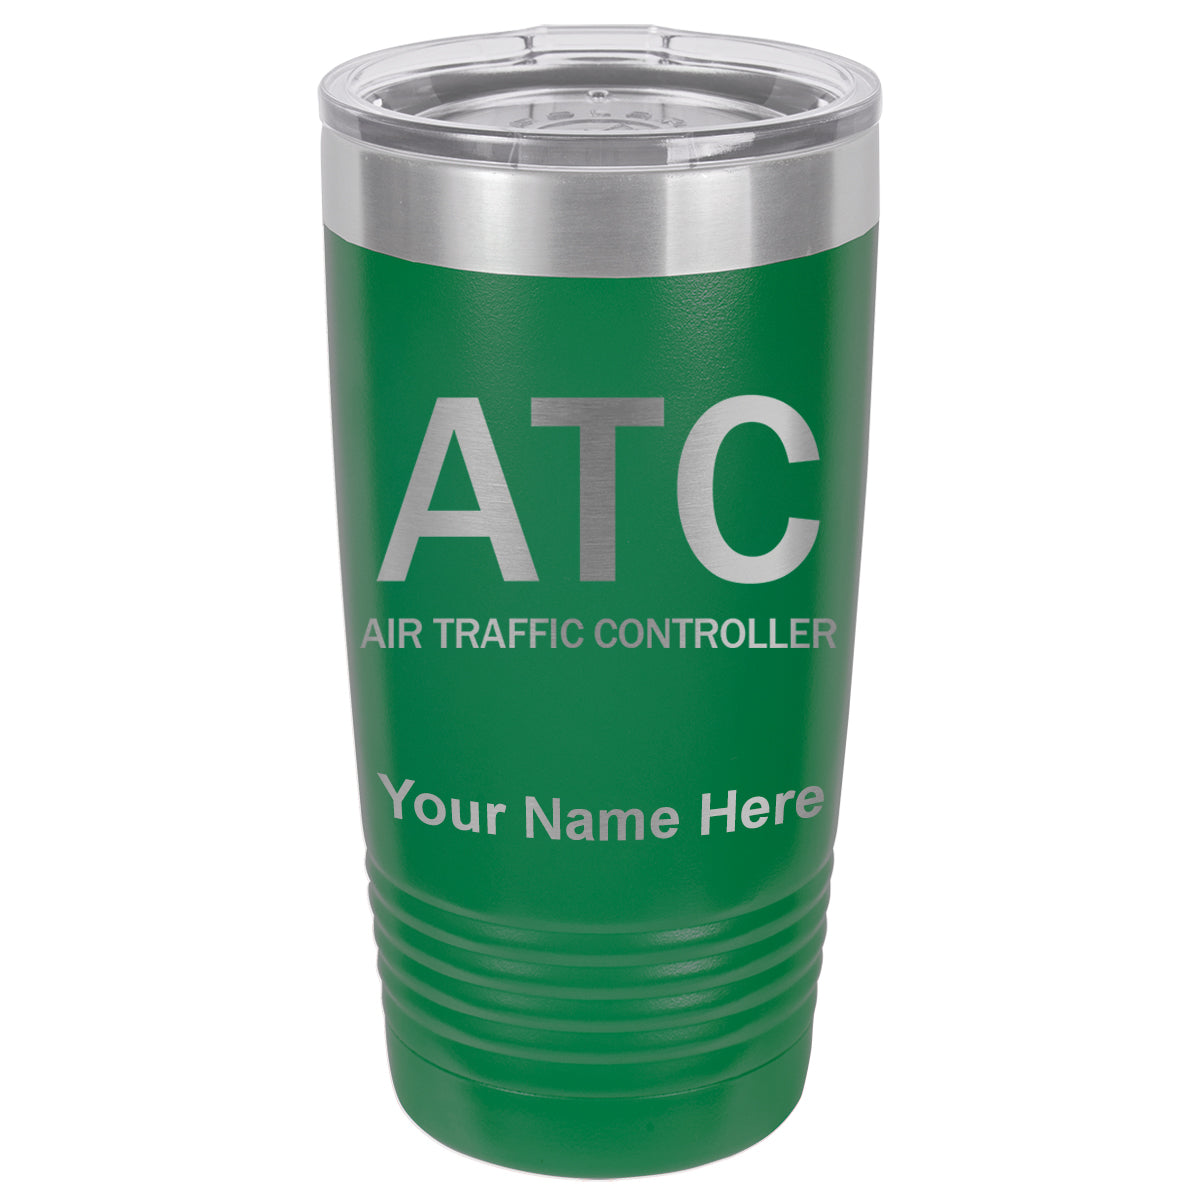 20oz Vacuum Insulated Tumbler Mug, ATC Air Traffic Controller, Personalized Engraving Included